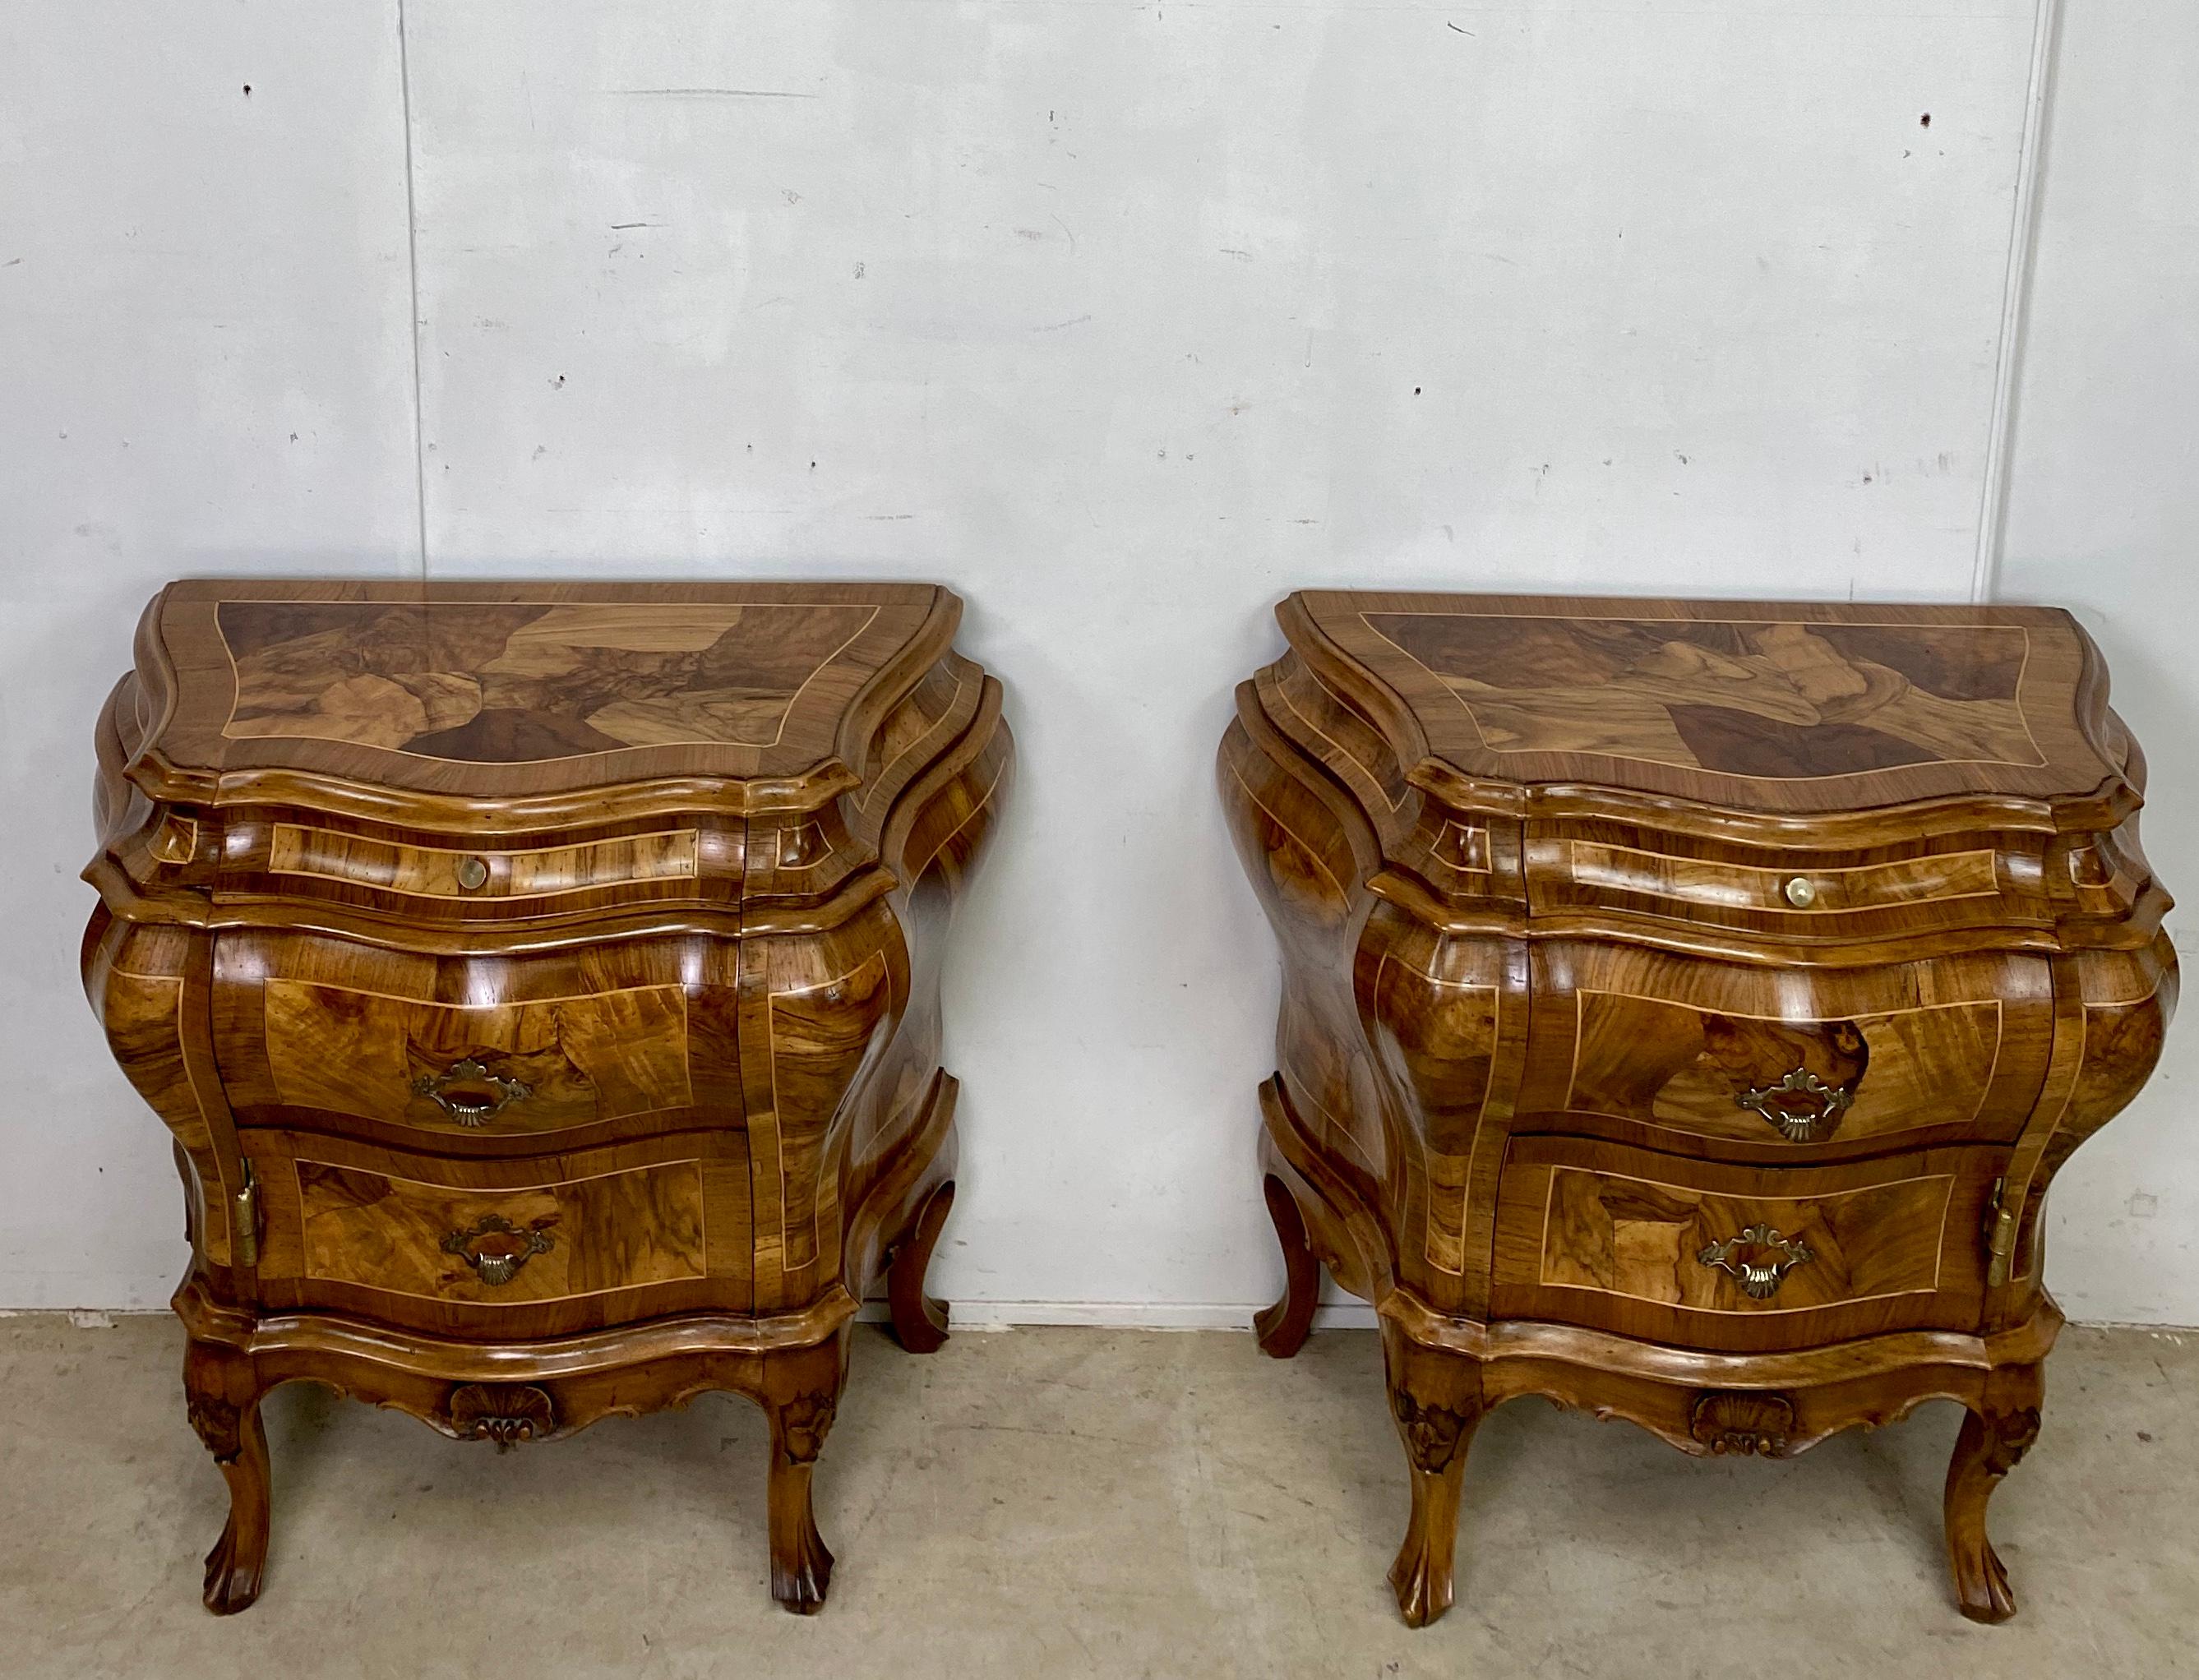 A very attractive pair of Italian Bombay commodes. These have been cleaned and polished so they look their very best.